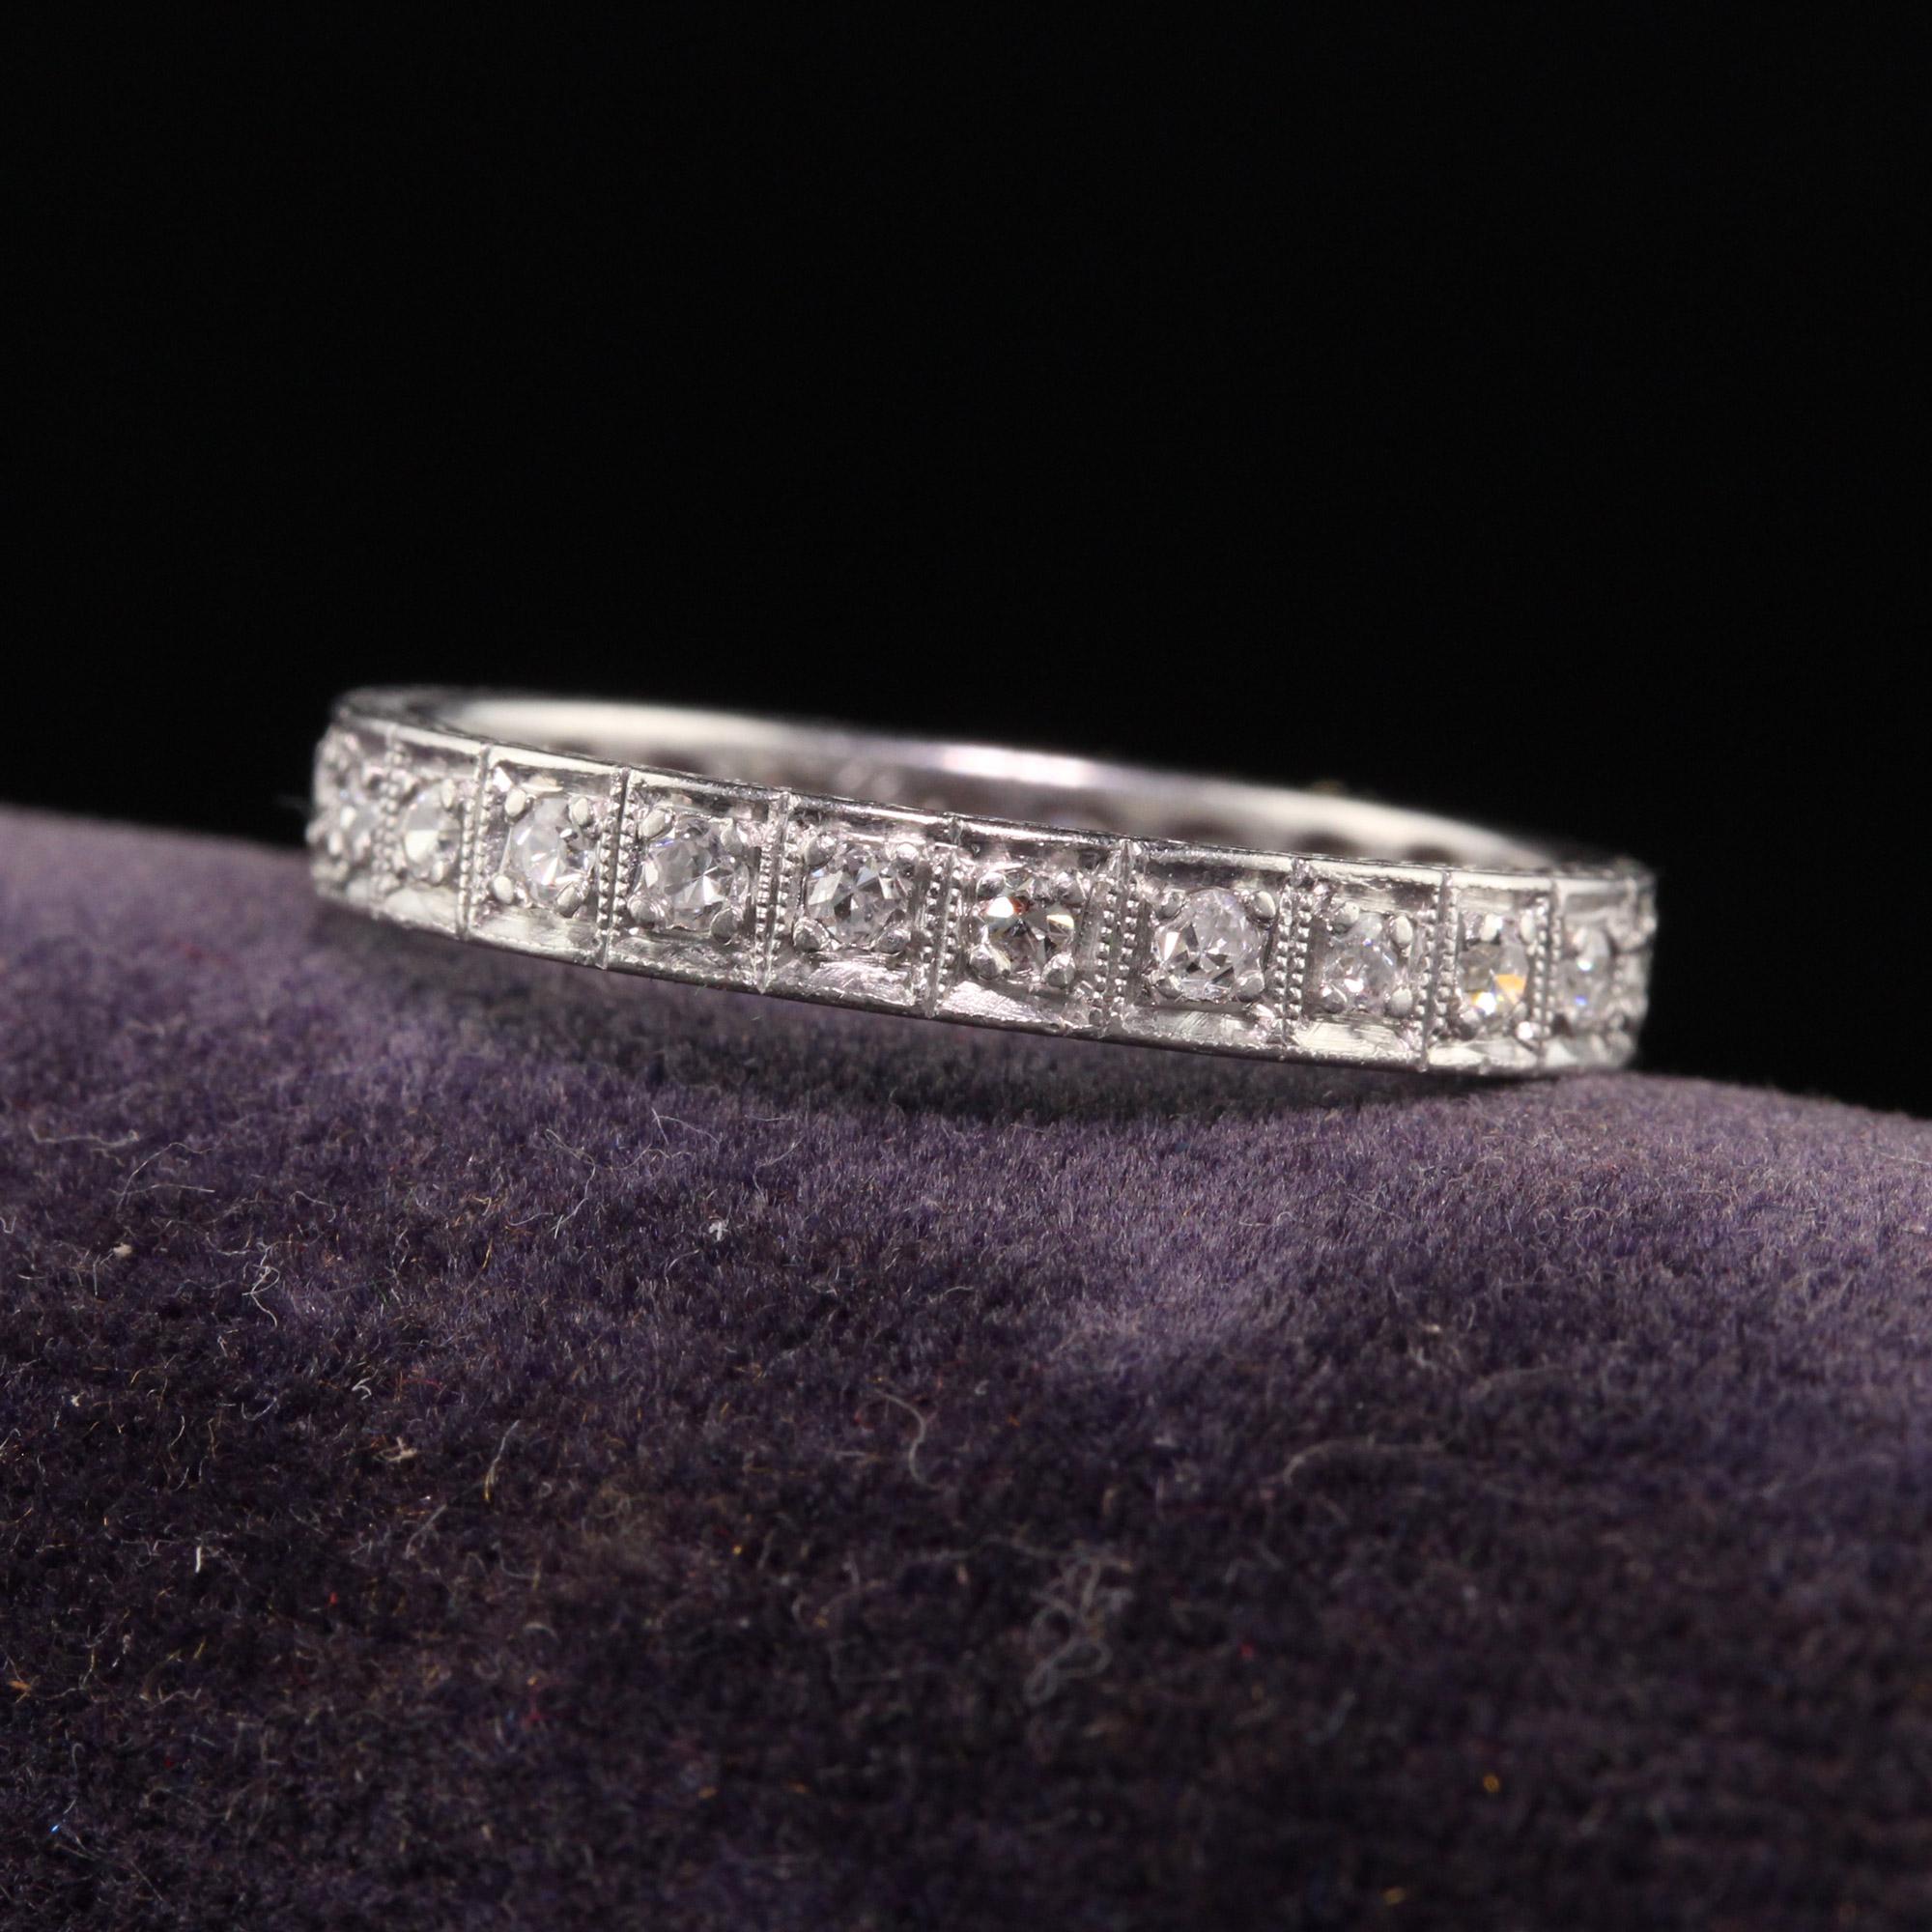 Beautiful Antique Art Deco Platinum Single Cut Diamond Engraved Eternity Band. this beautiful ring is crafted in platinum. There are single cut diamonds going around the entire ring and it is engraved on both sides of the band. It is in good